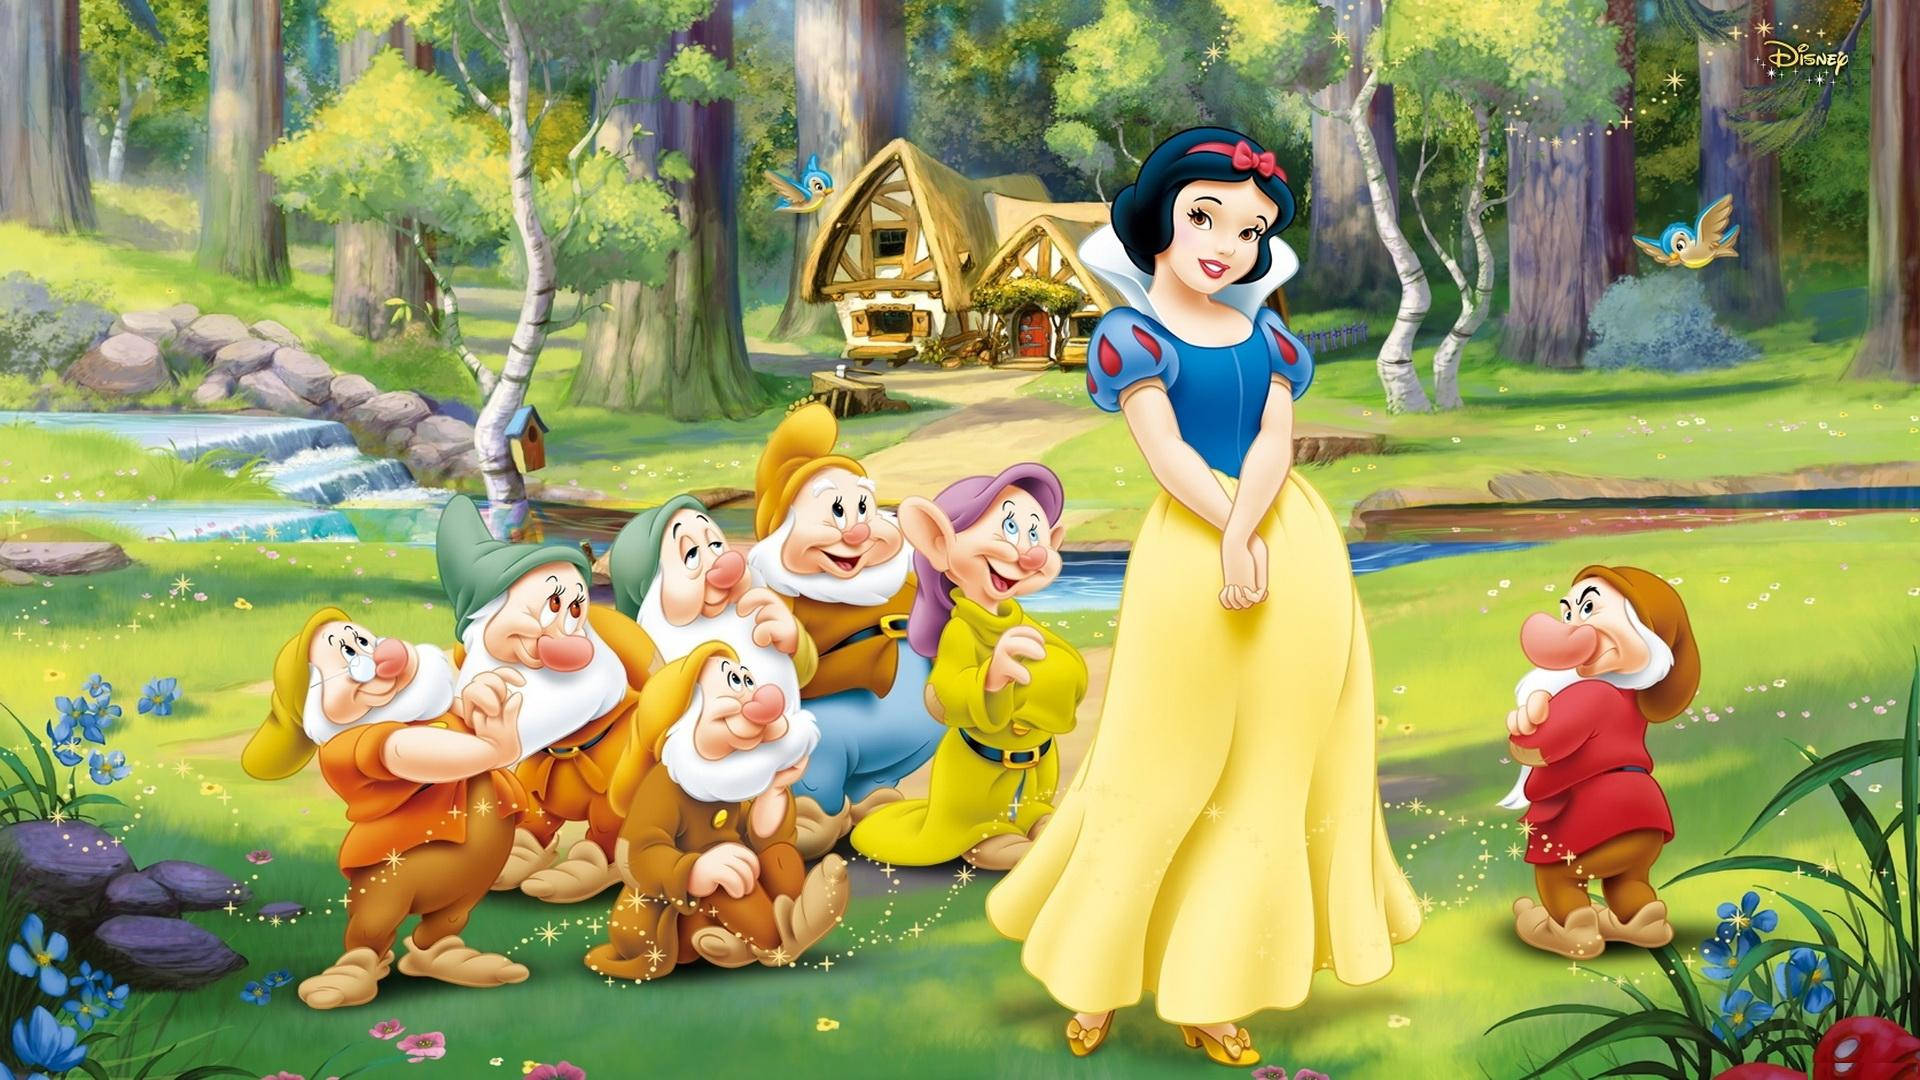 Snow White With Animal Friends In Disney's Classic Fairytale Background